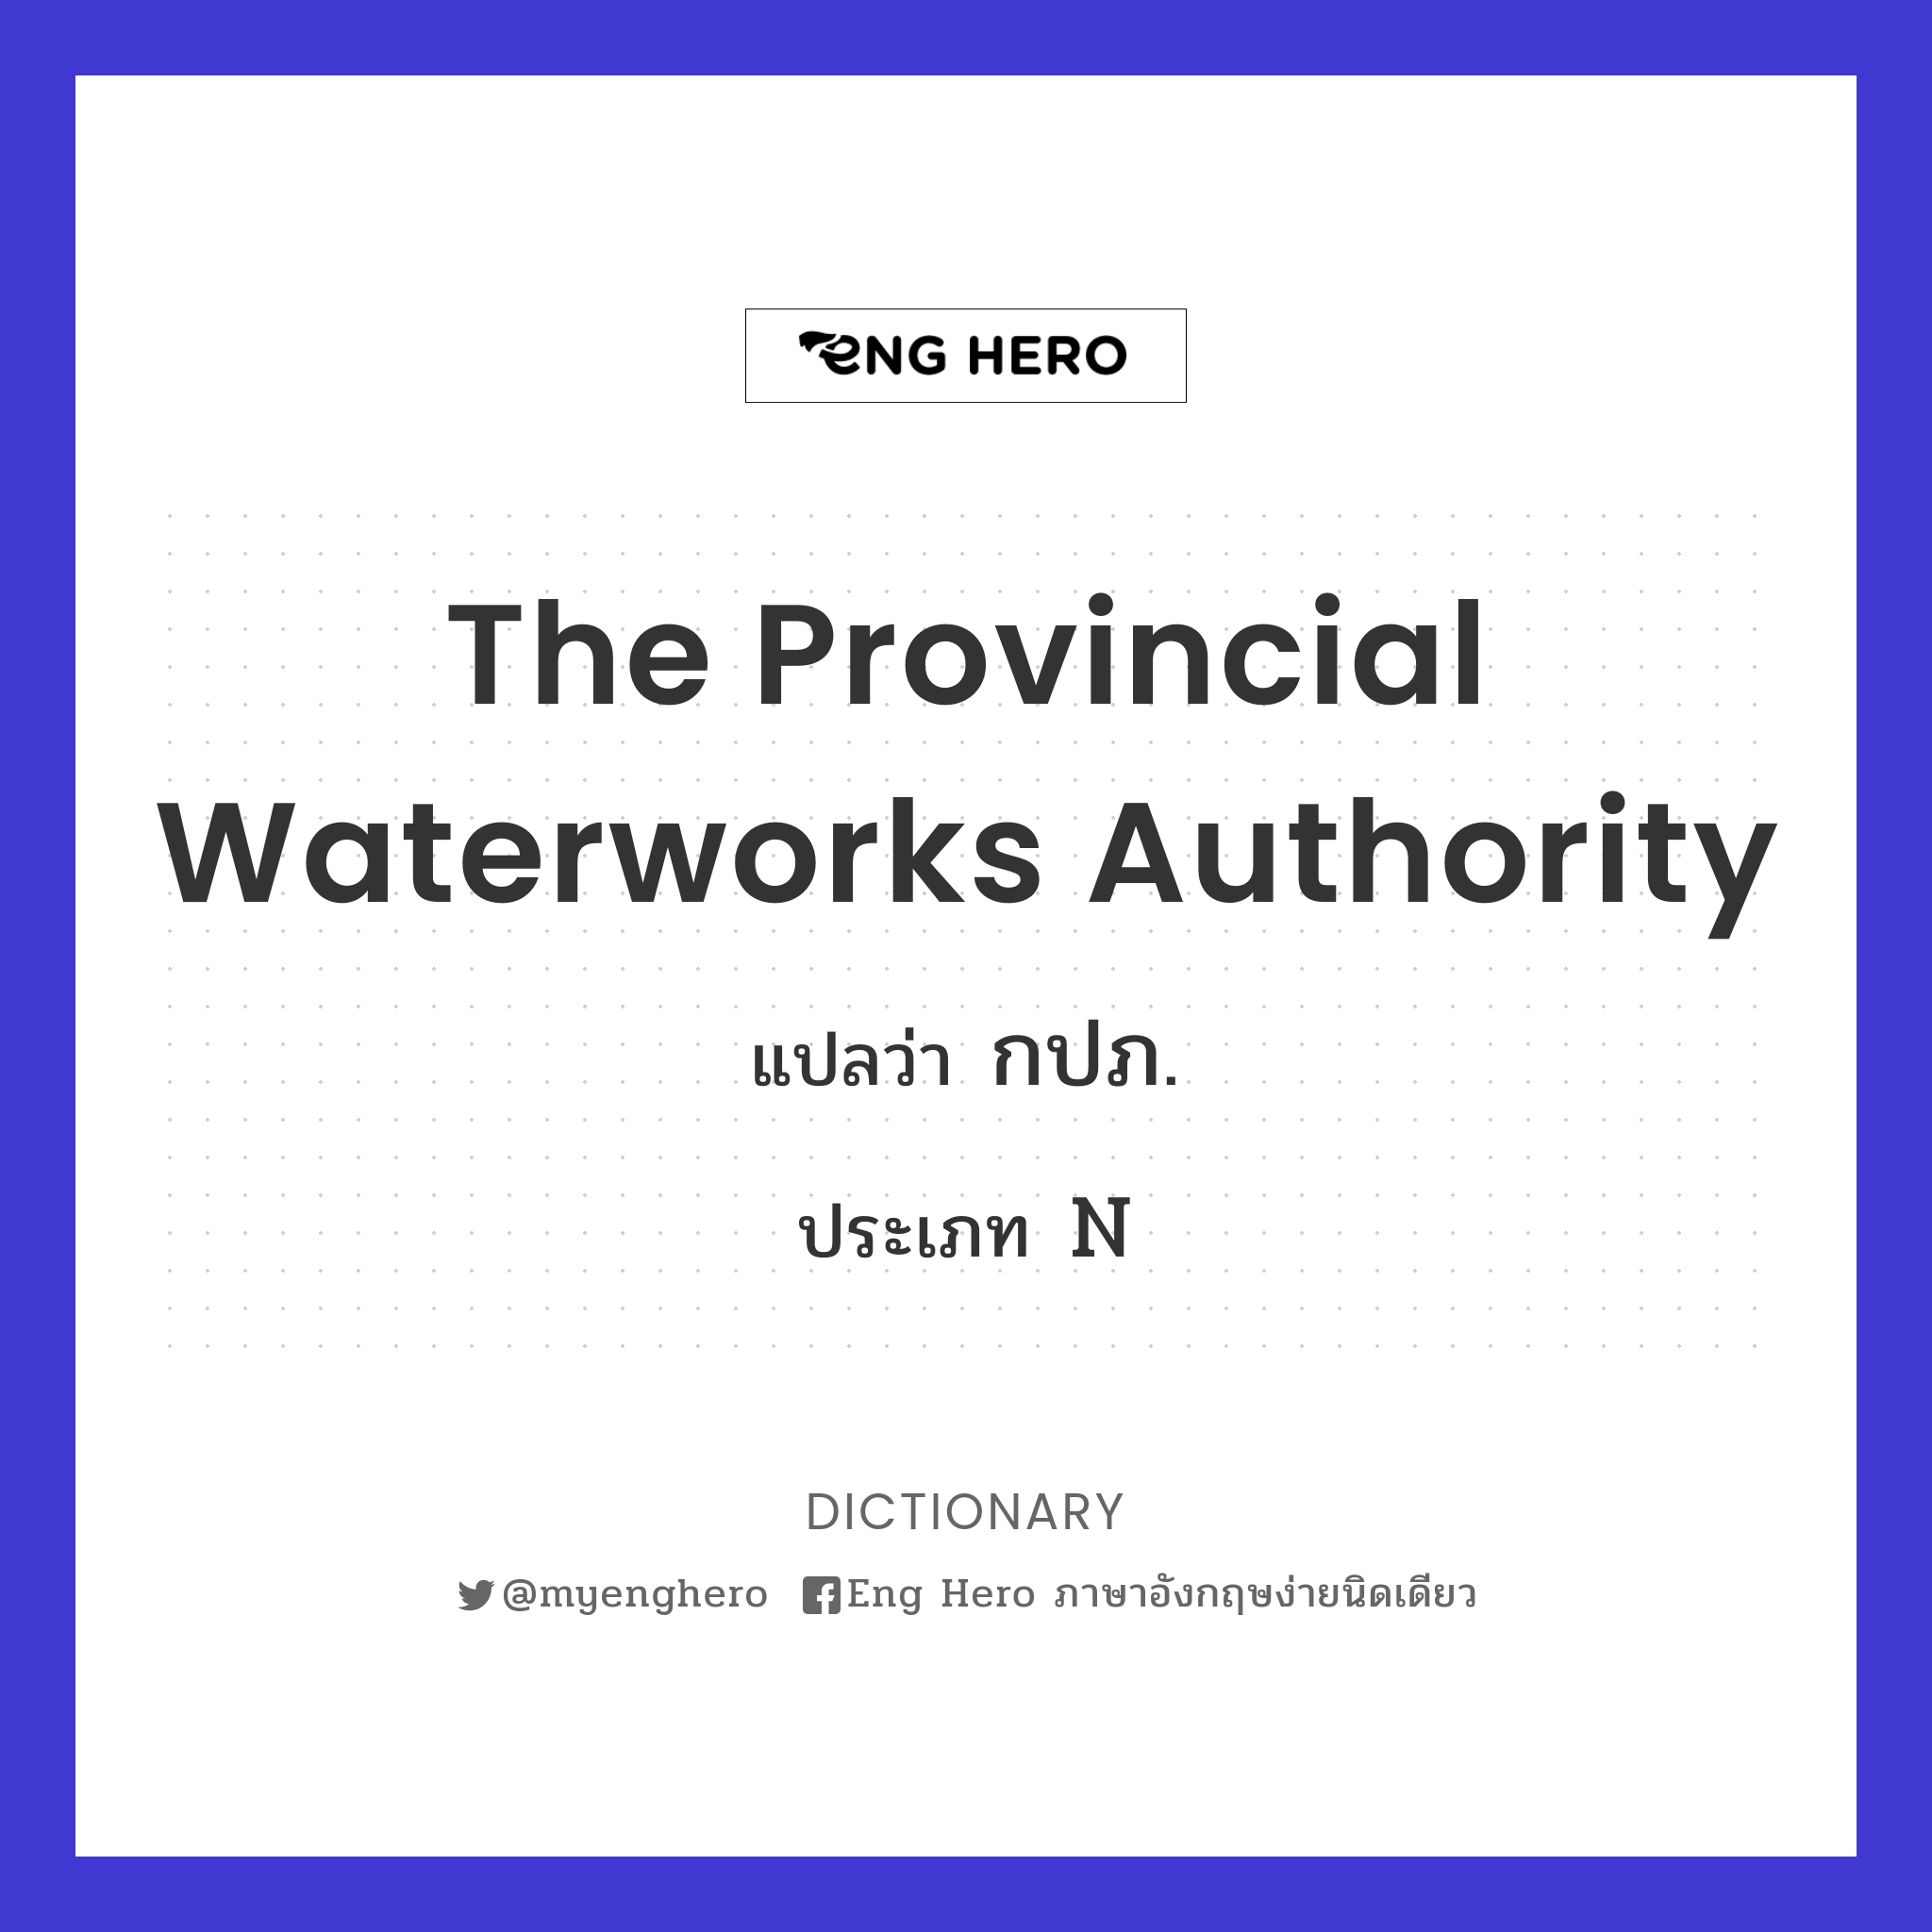 The Provincial Waterworks Authority